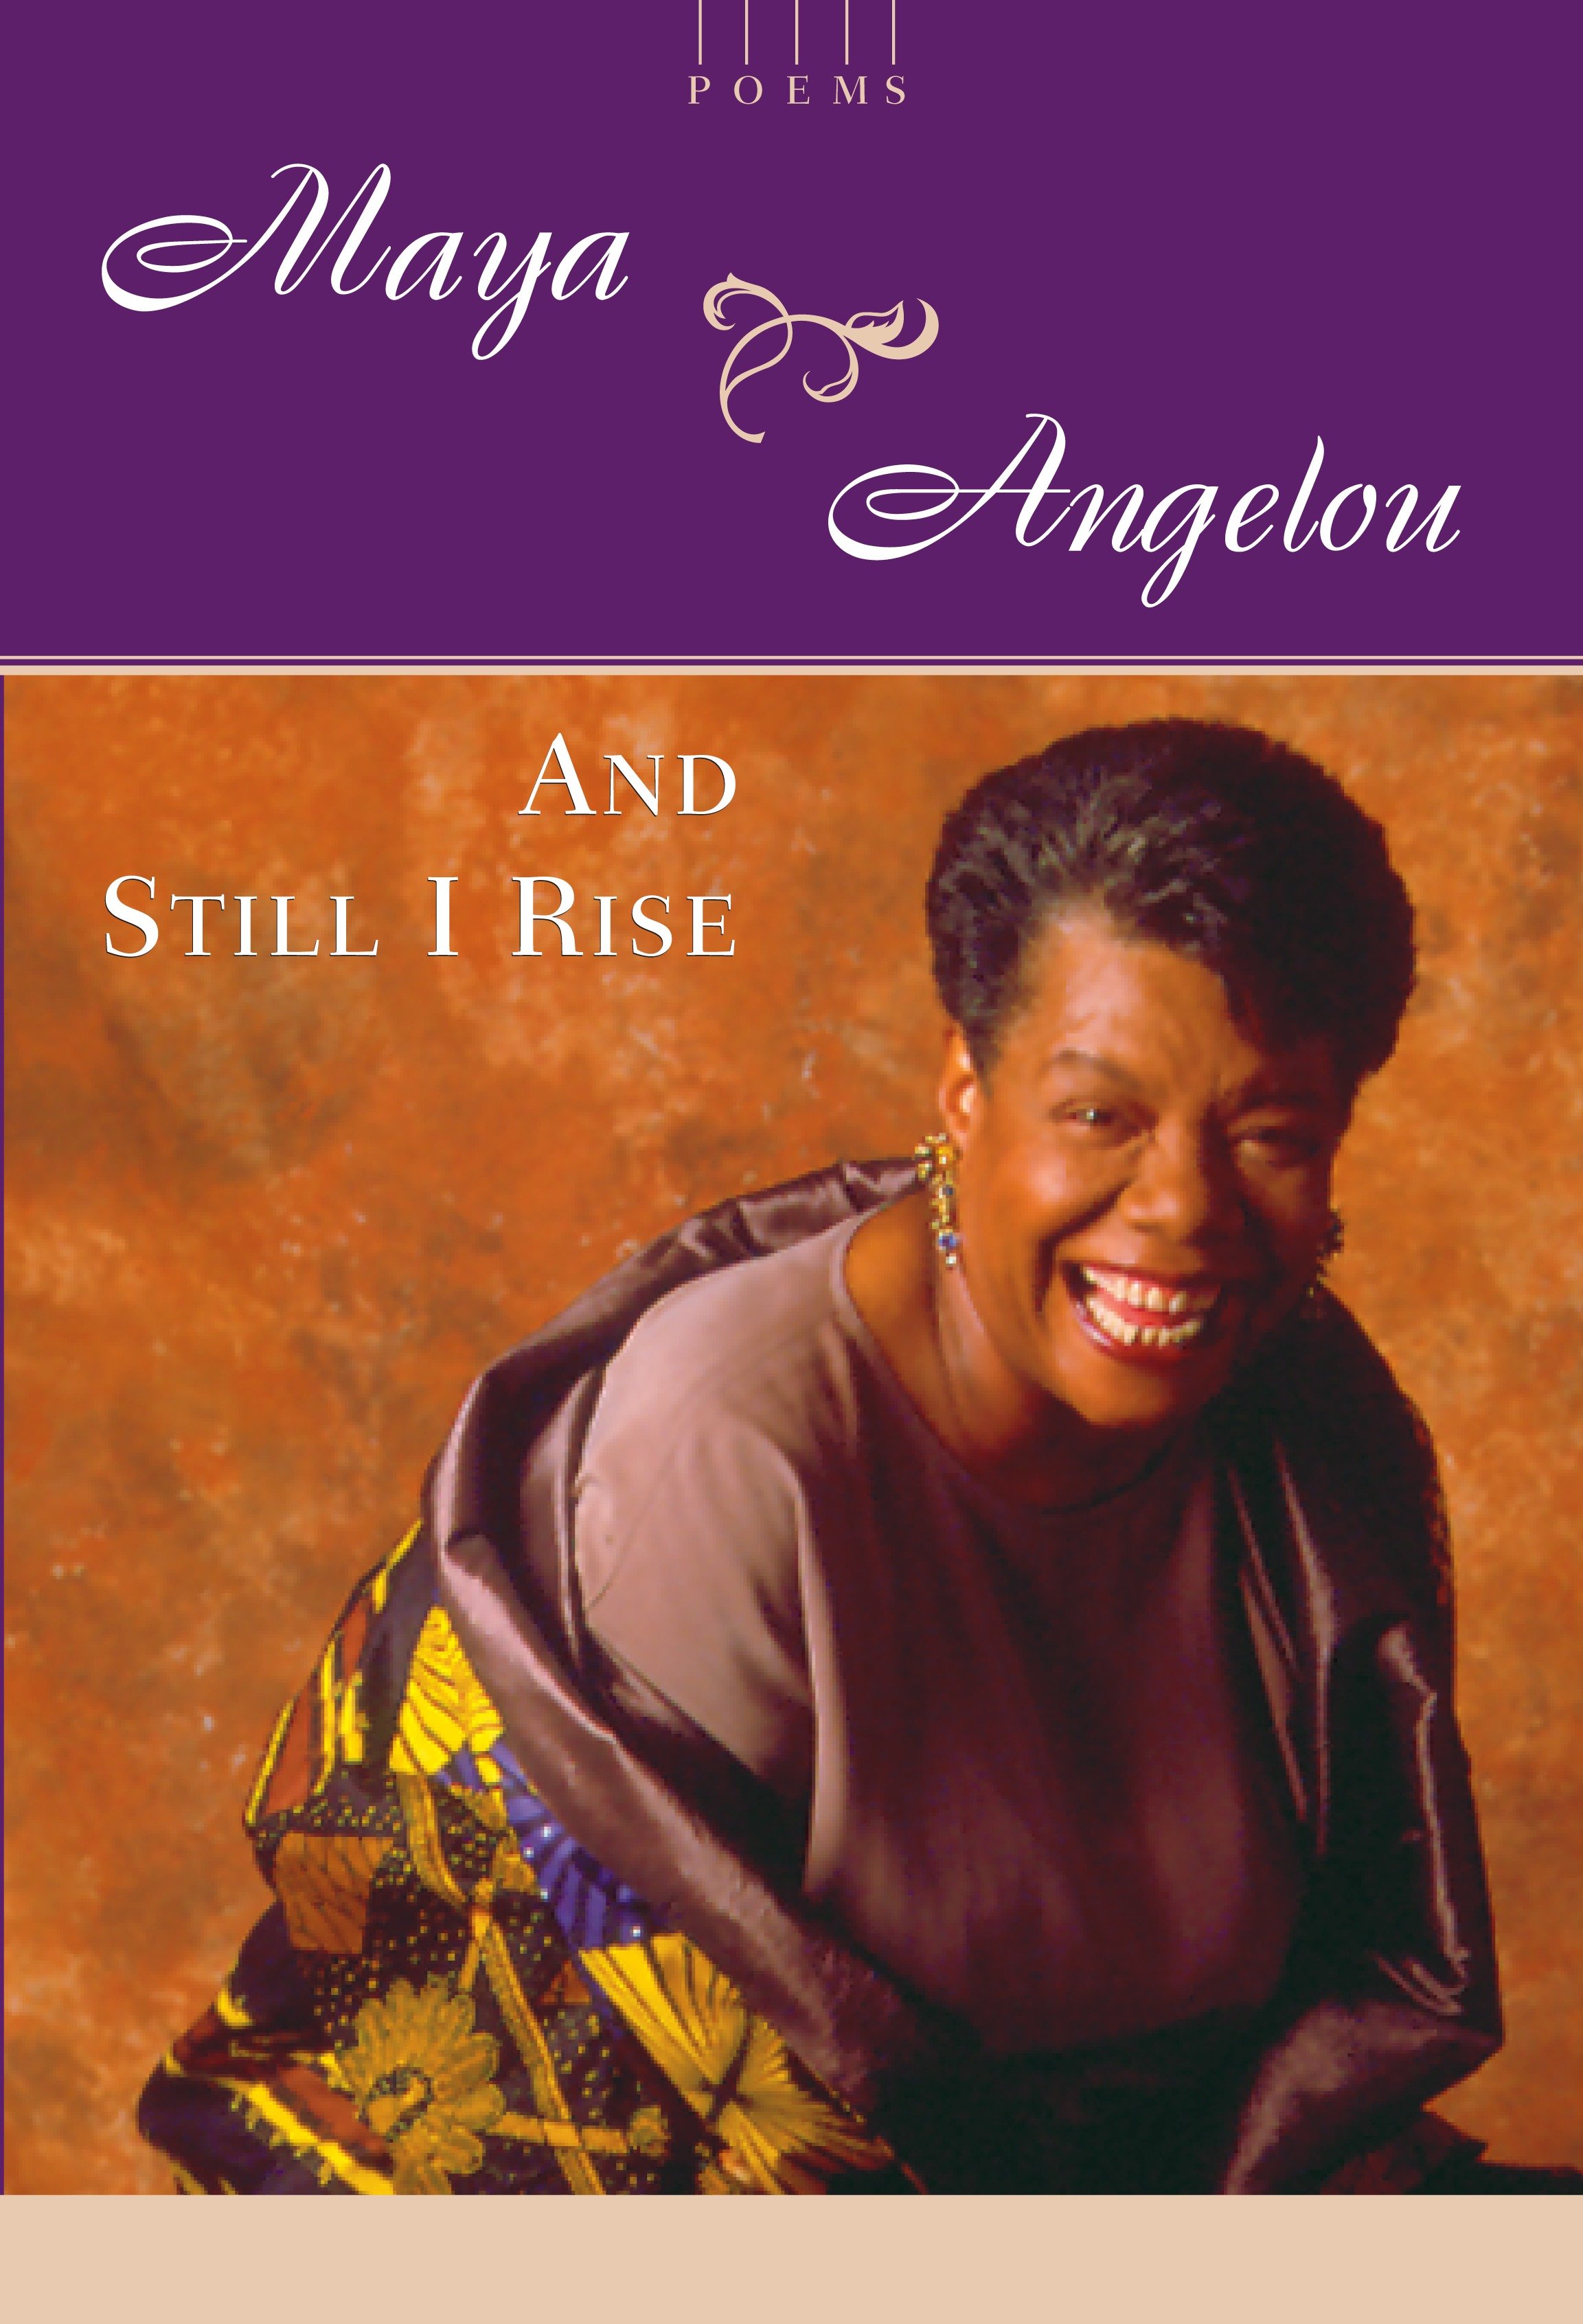 And still I rise cover image